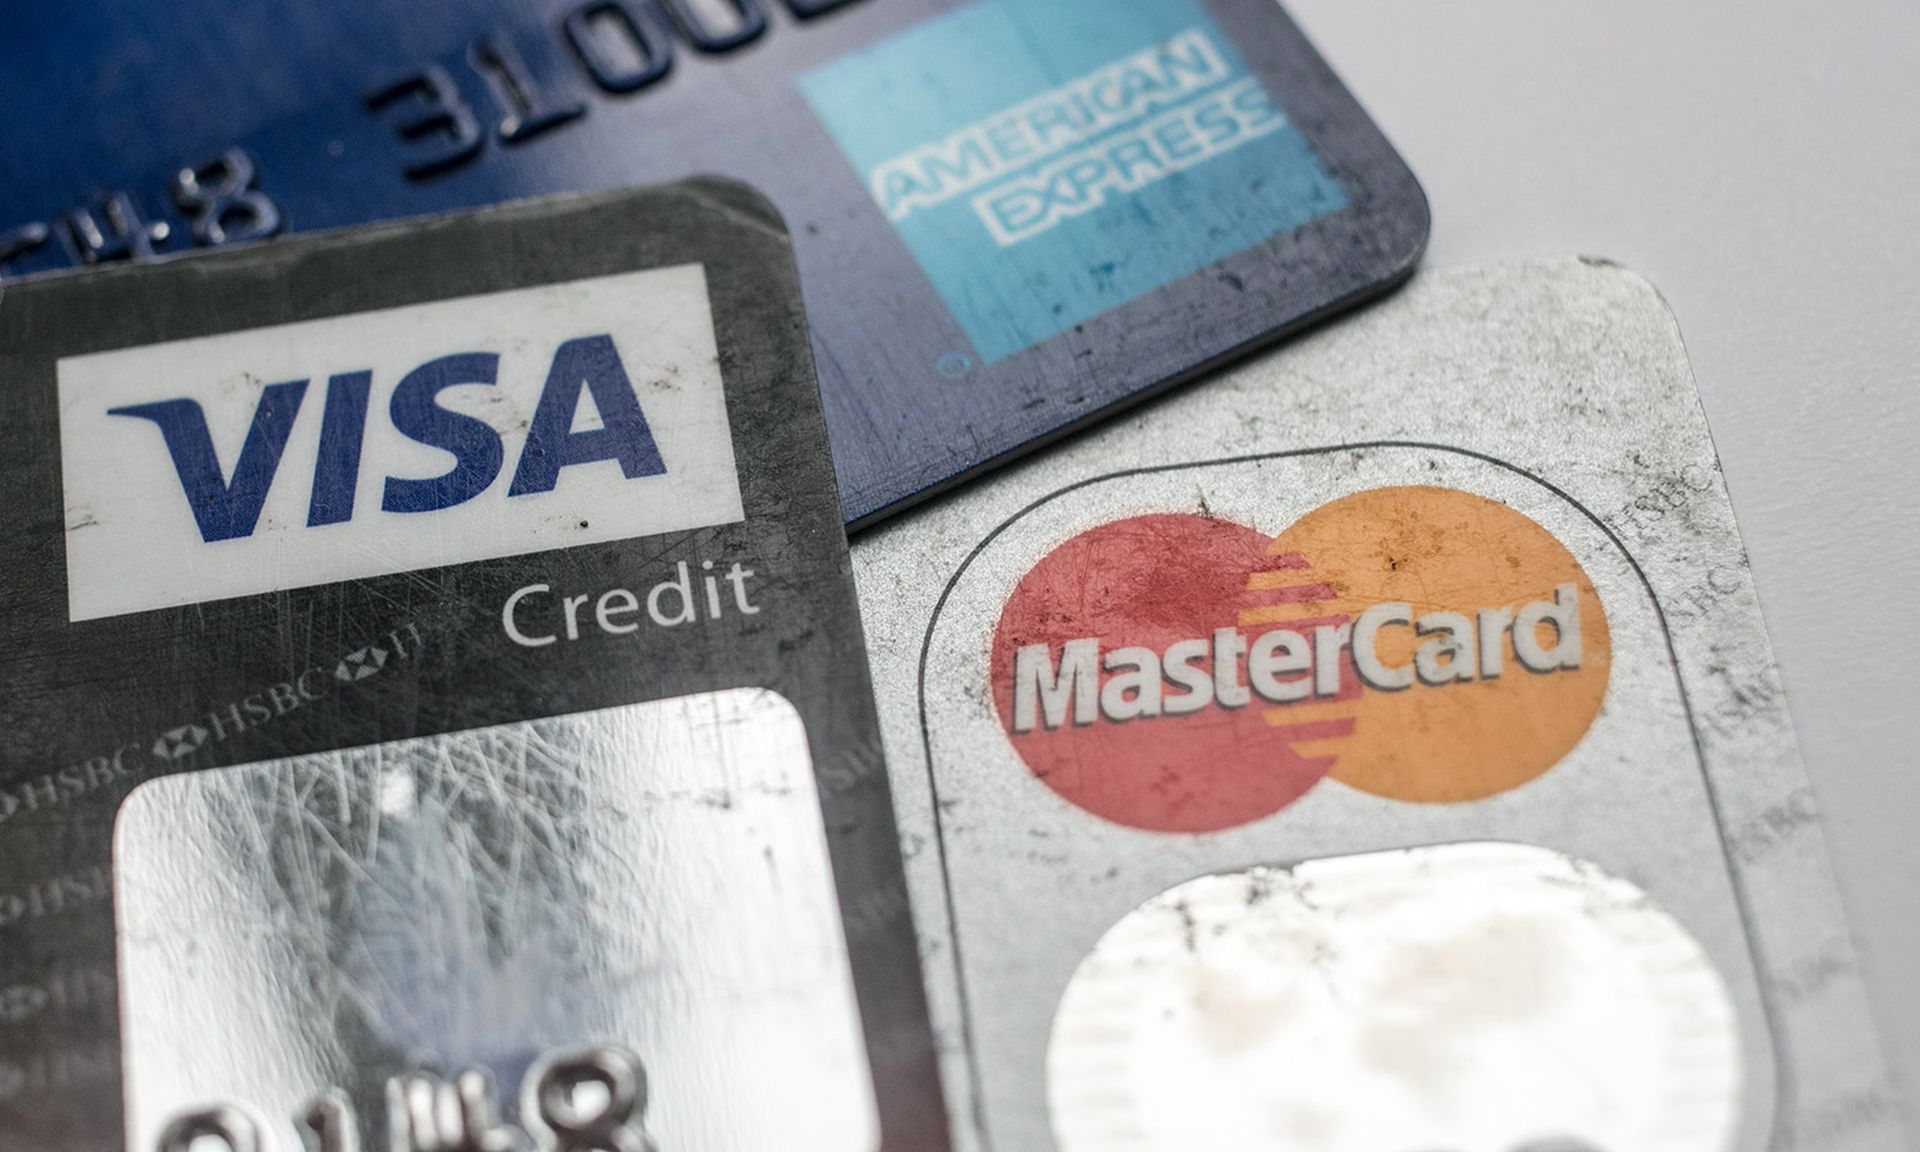 Credit and debit cards are seen Nov. 3, 2017, in Bristol, England.(Matt Cardy/Getty Images)